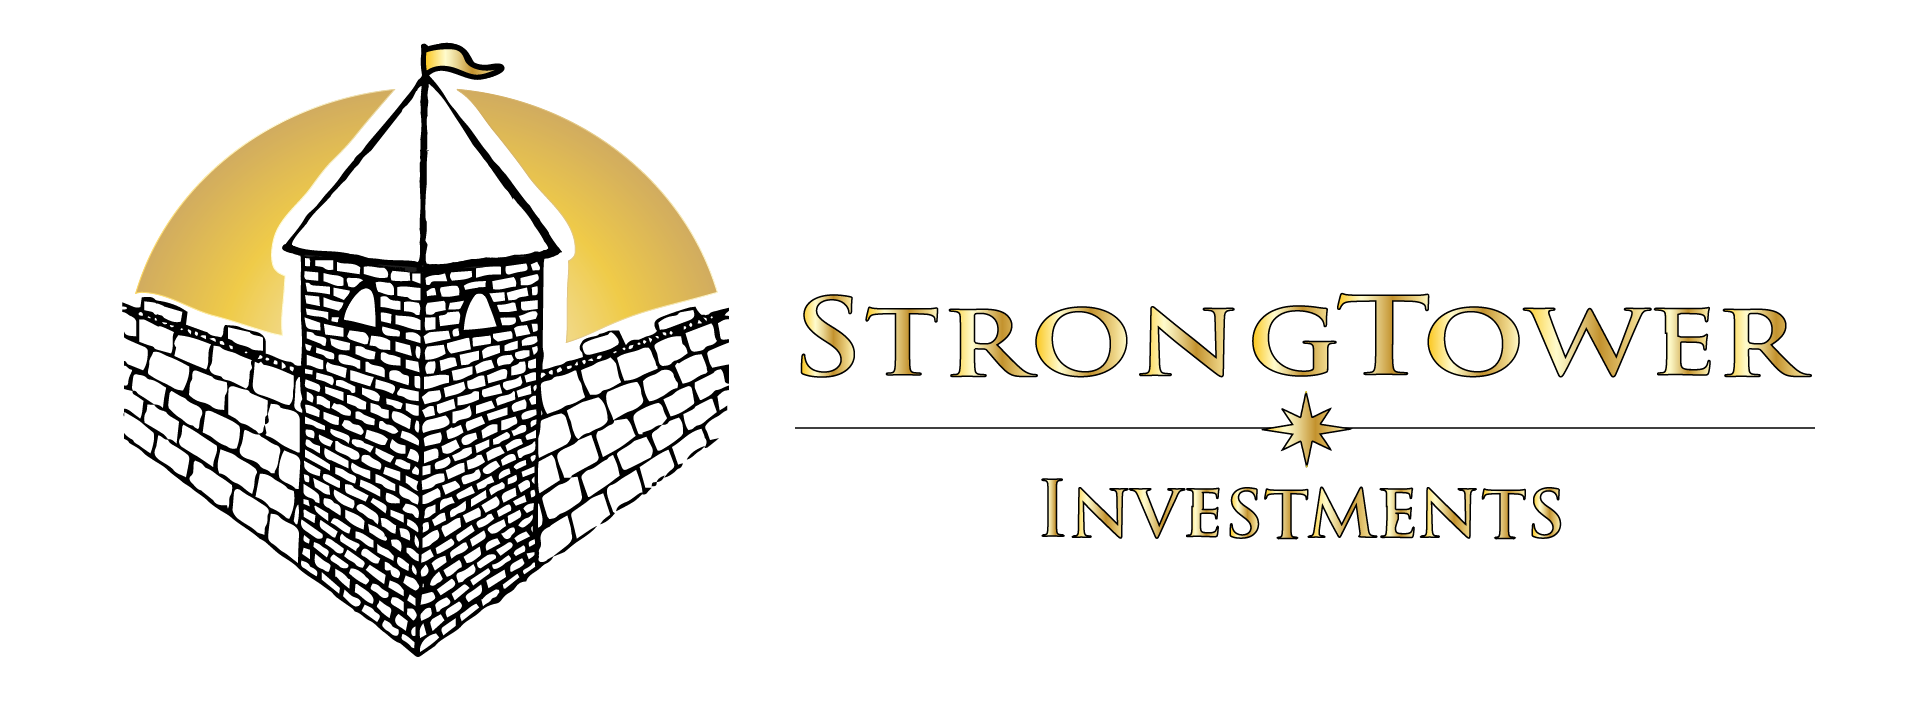 StrongTower Investments